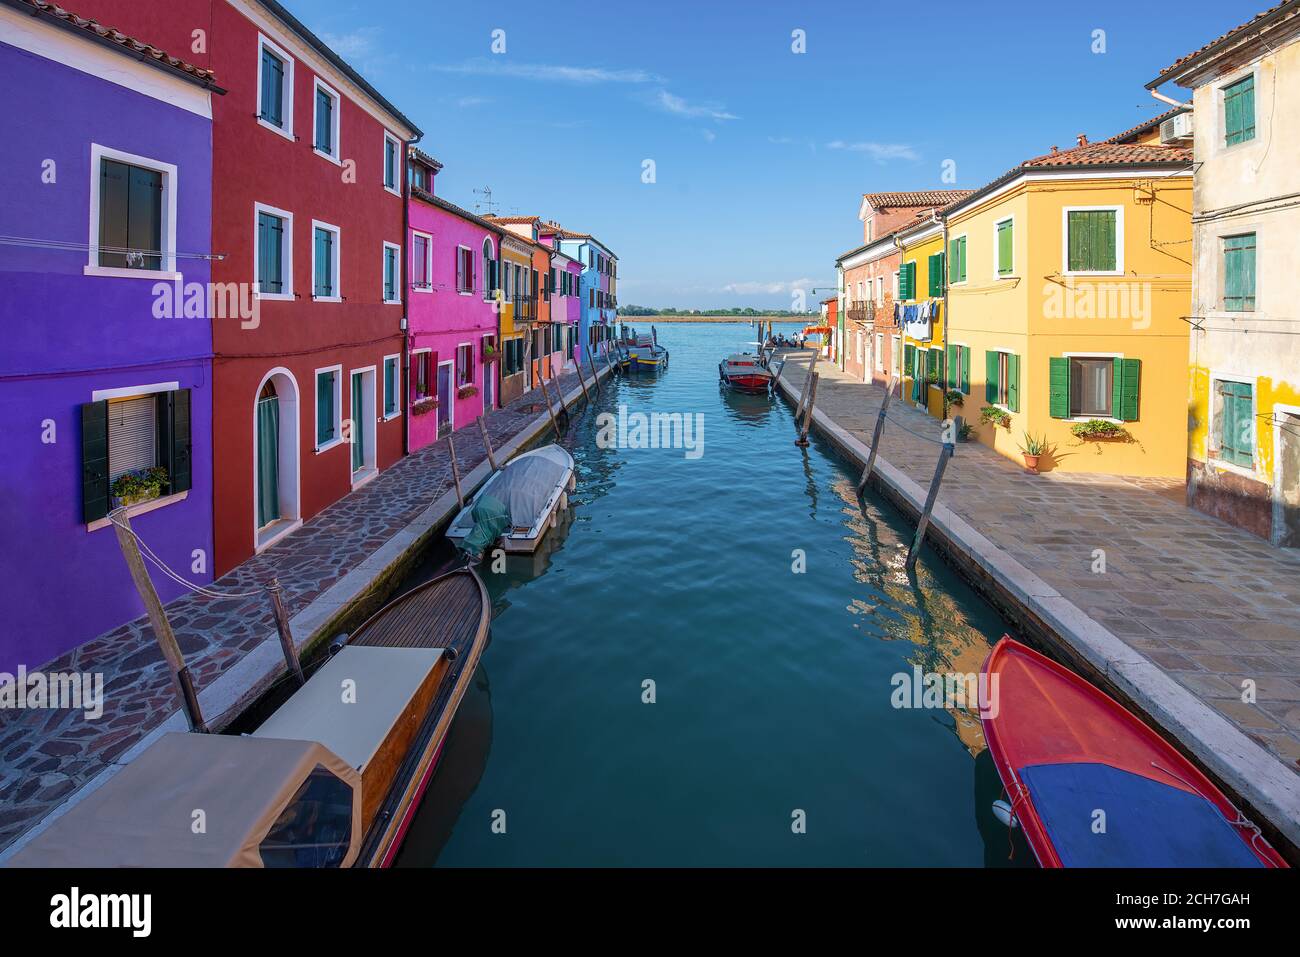 The colourful houses of Burano, Italy Stock Photo